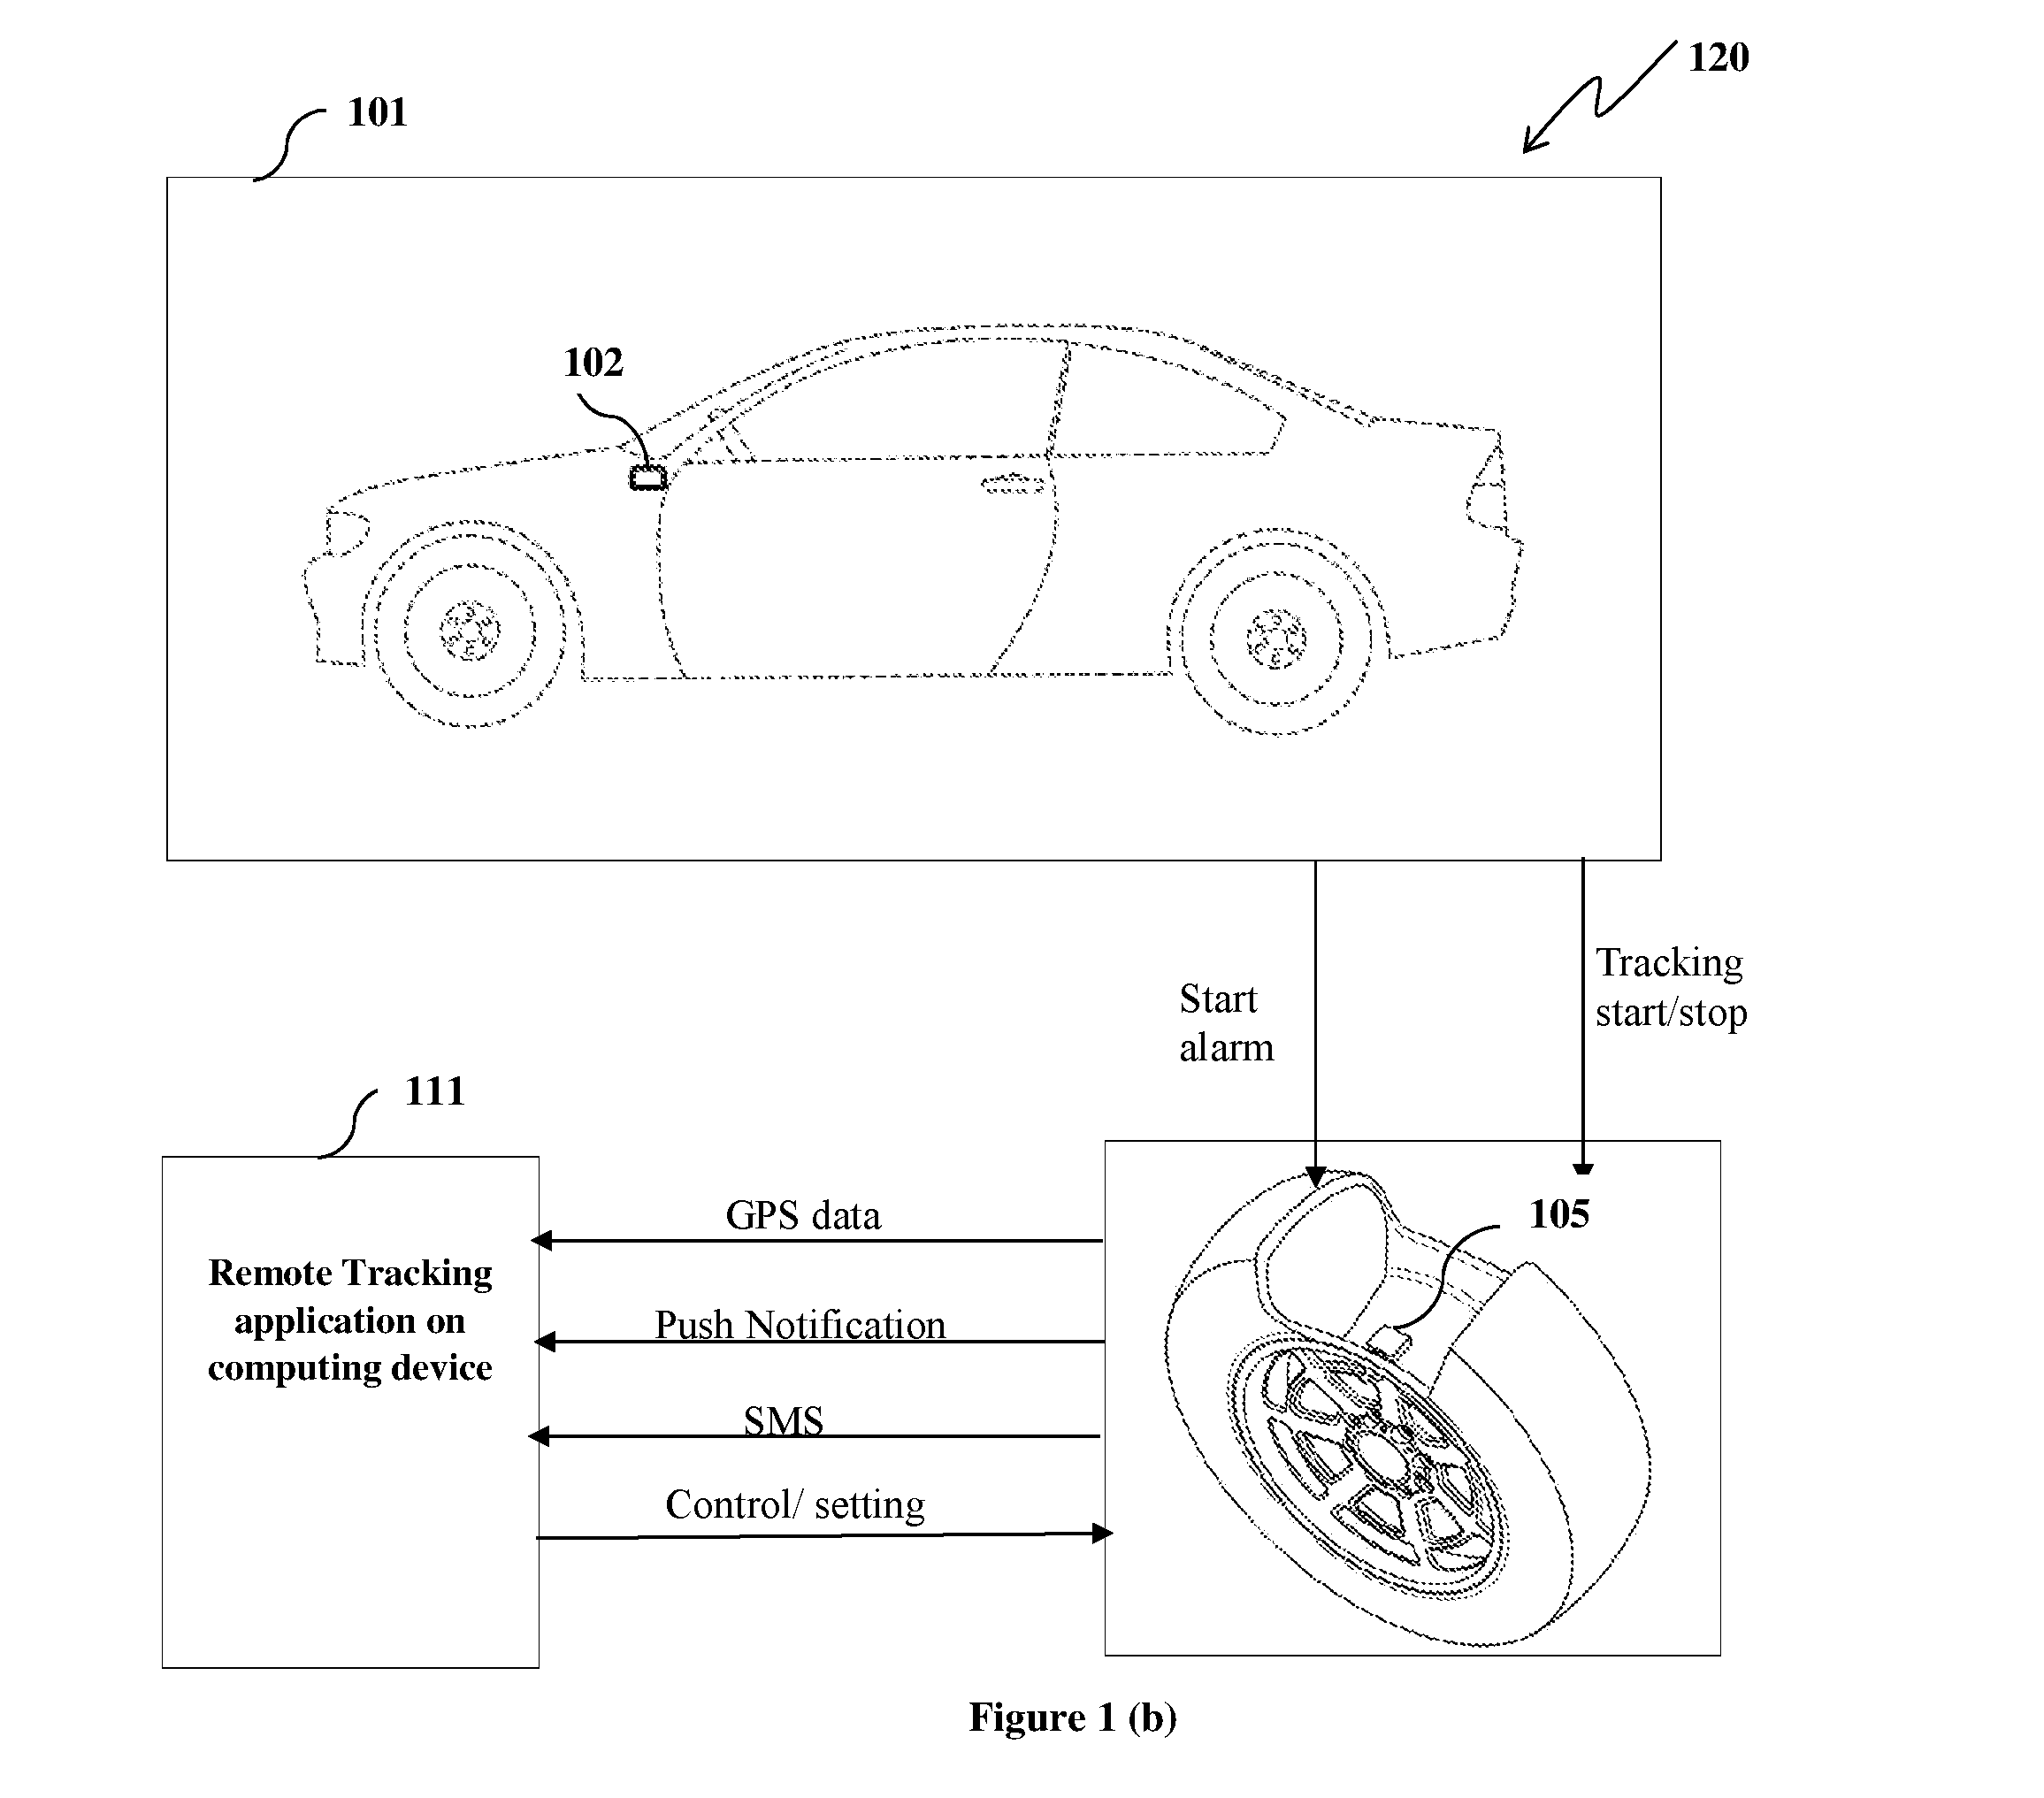 System and method for Anti-theft and tracking of an automobile and automobile wheels